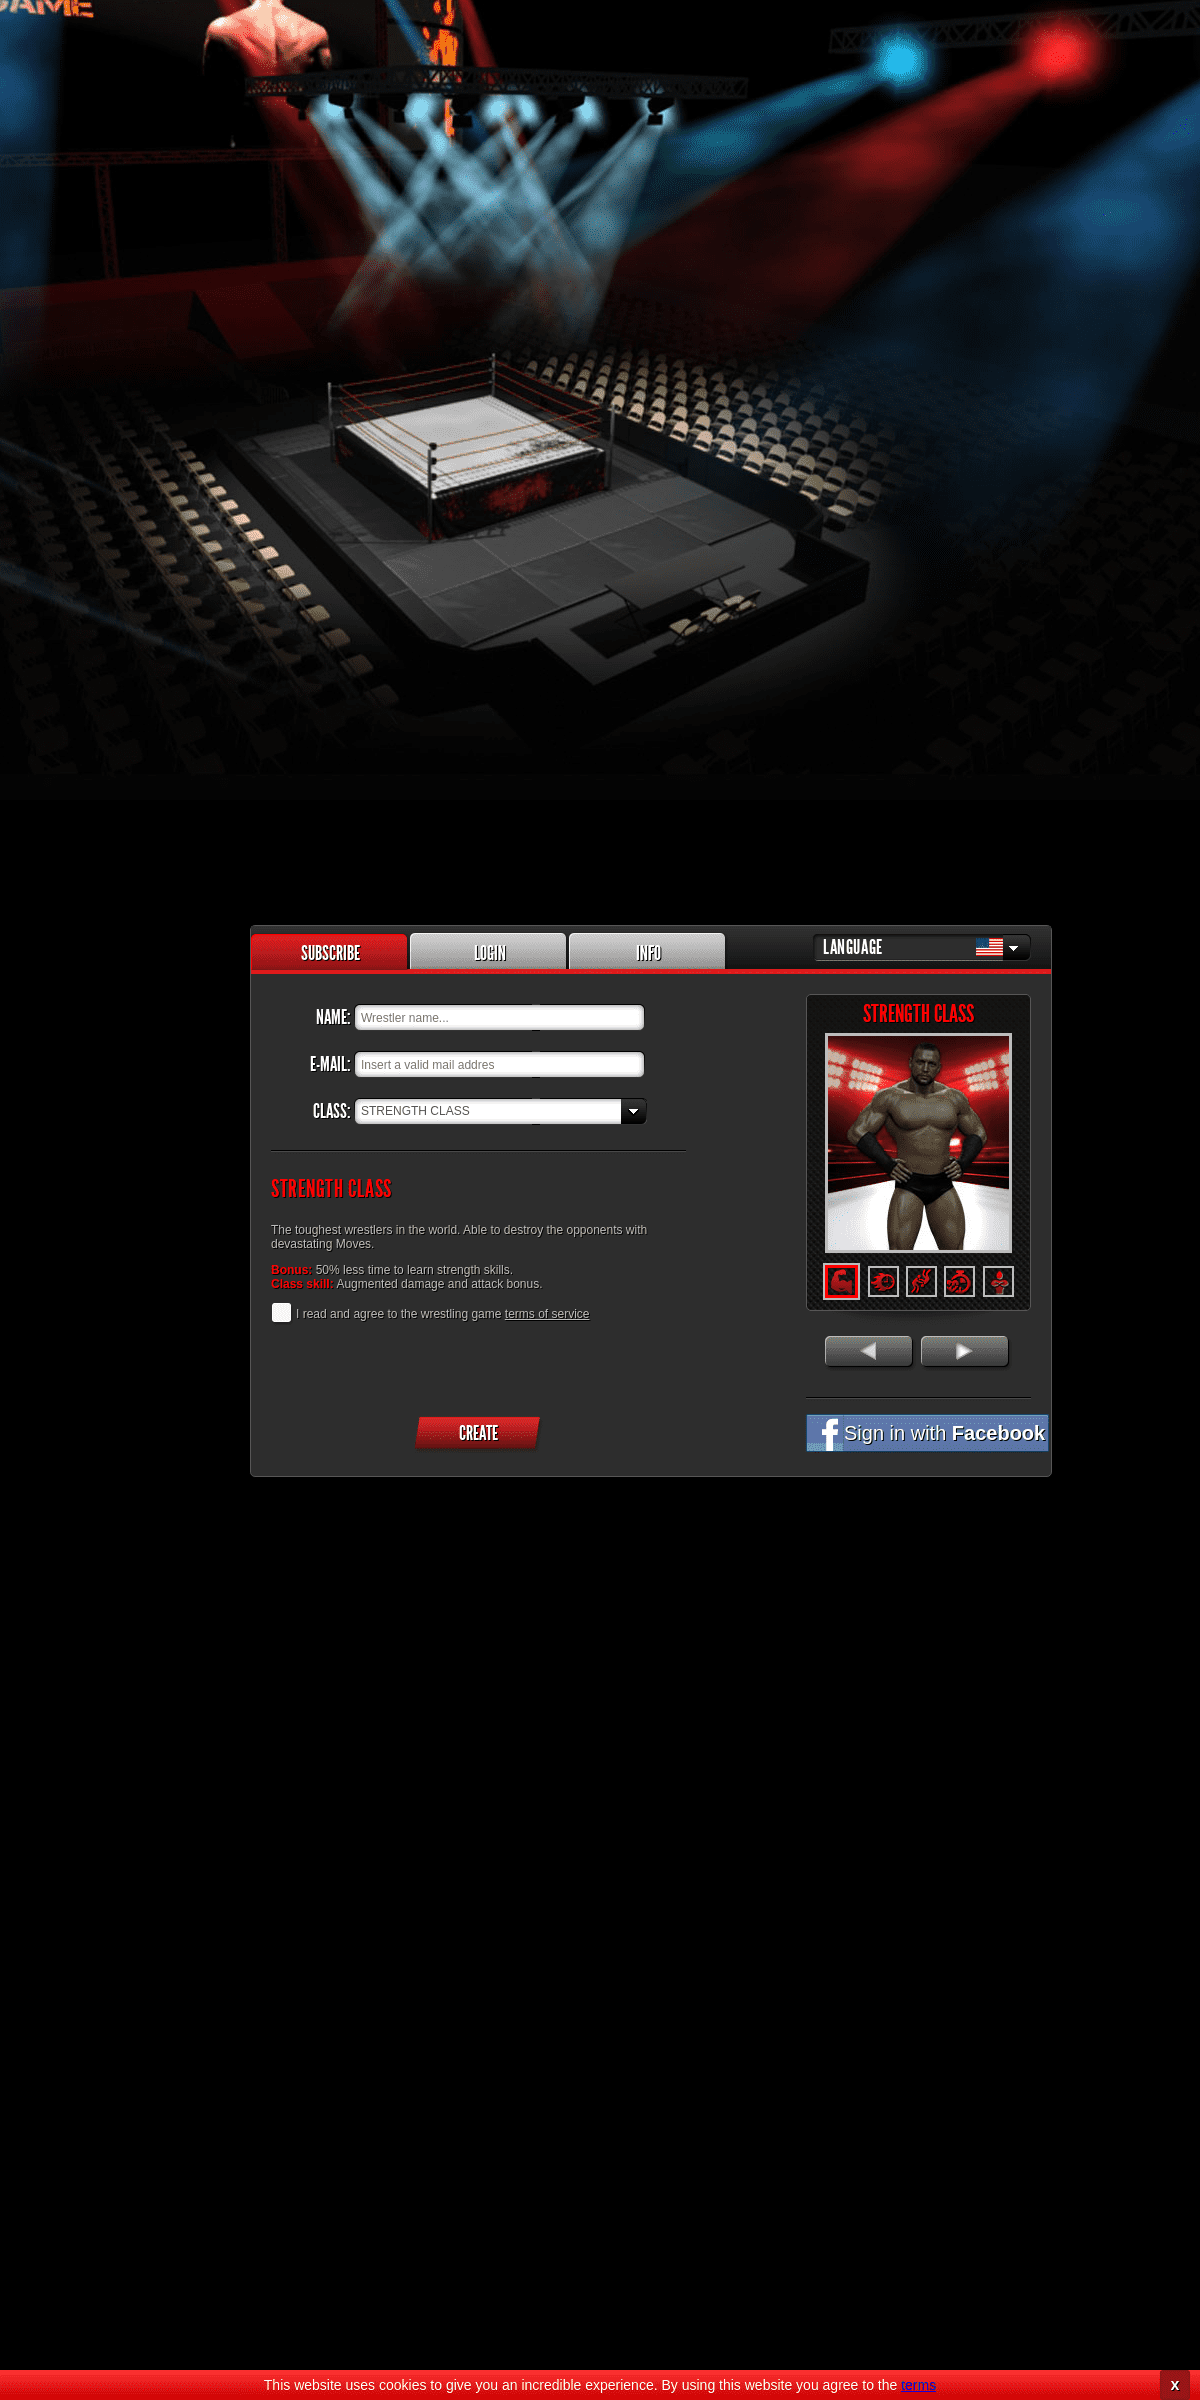 A complete backup of thewrestlinggame.com